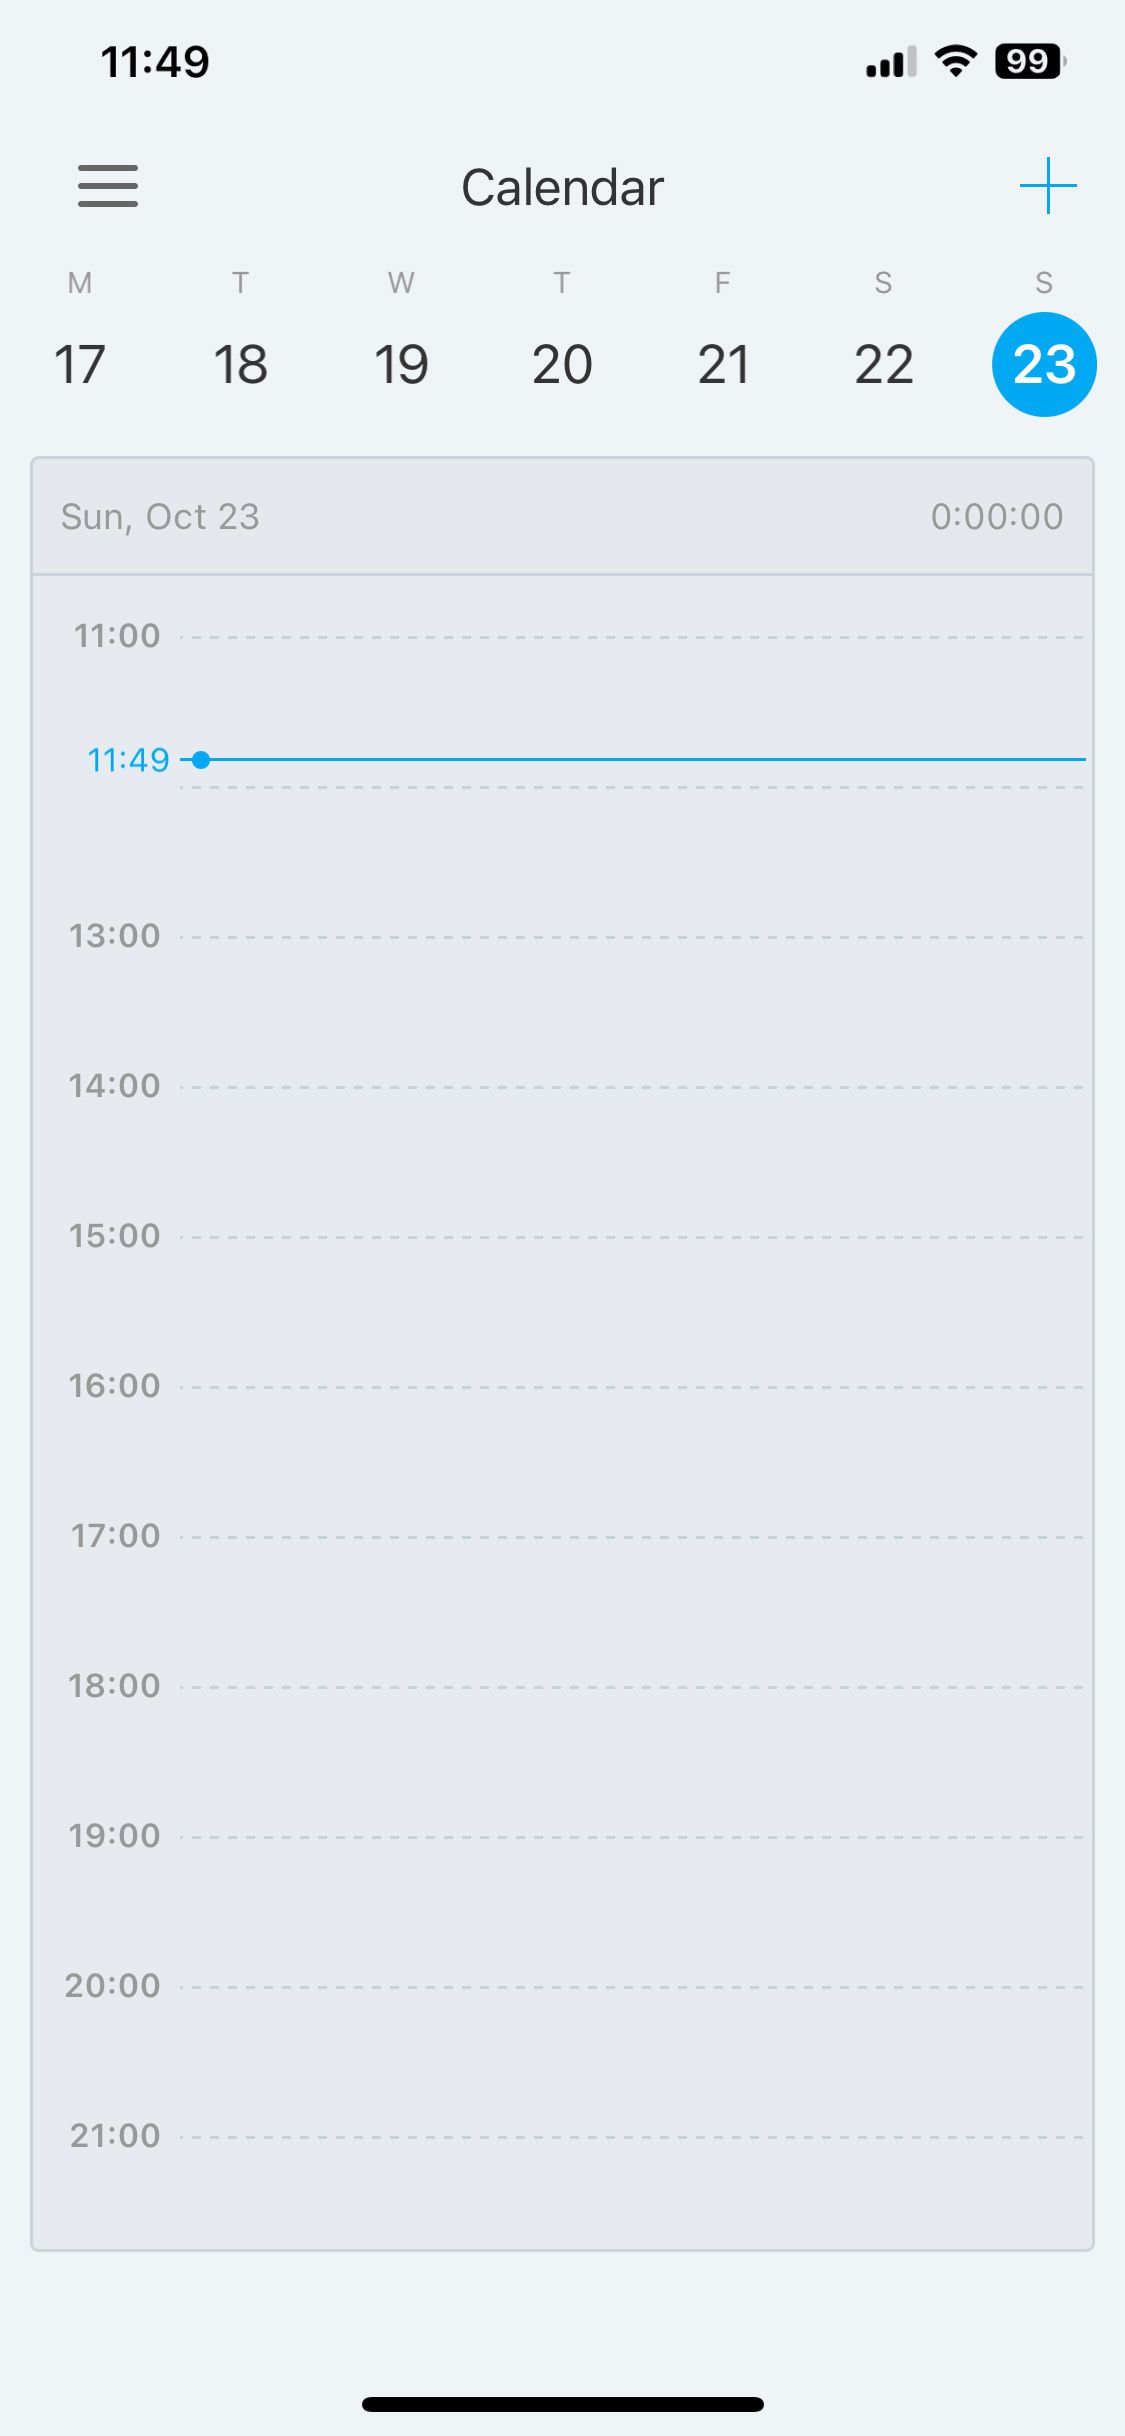 Calendar on Clockify Tracker for iPhone